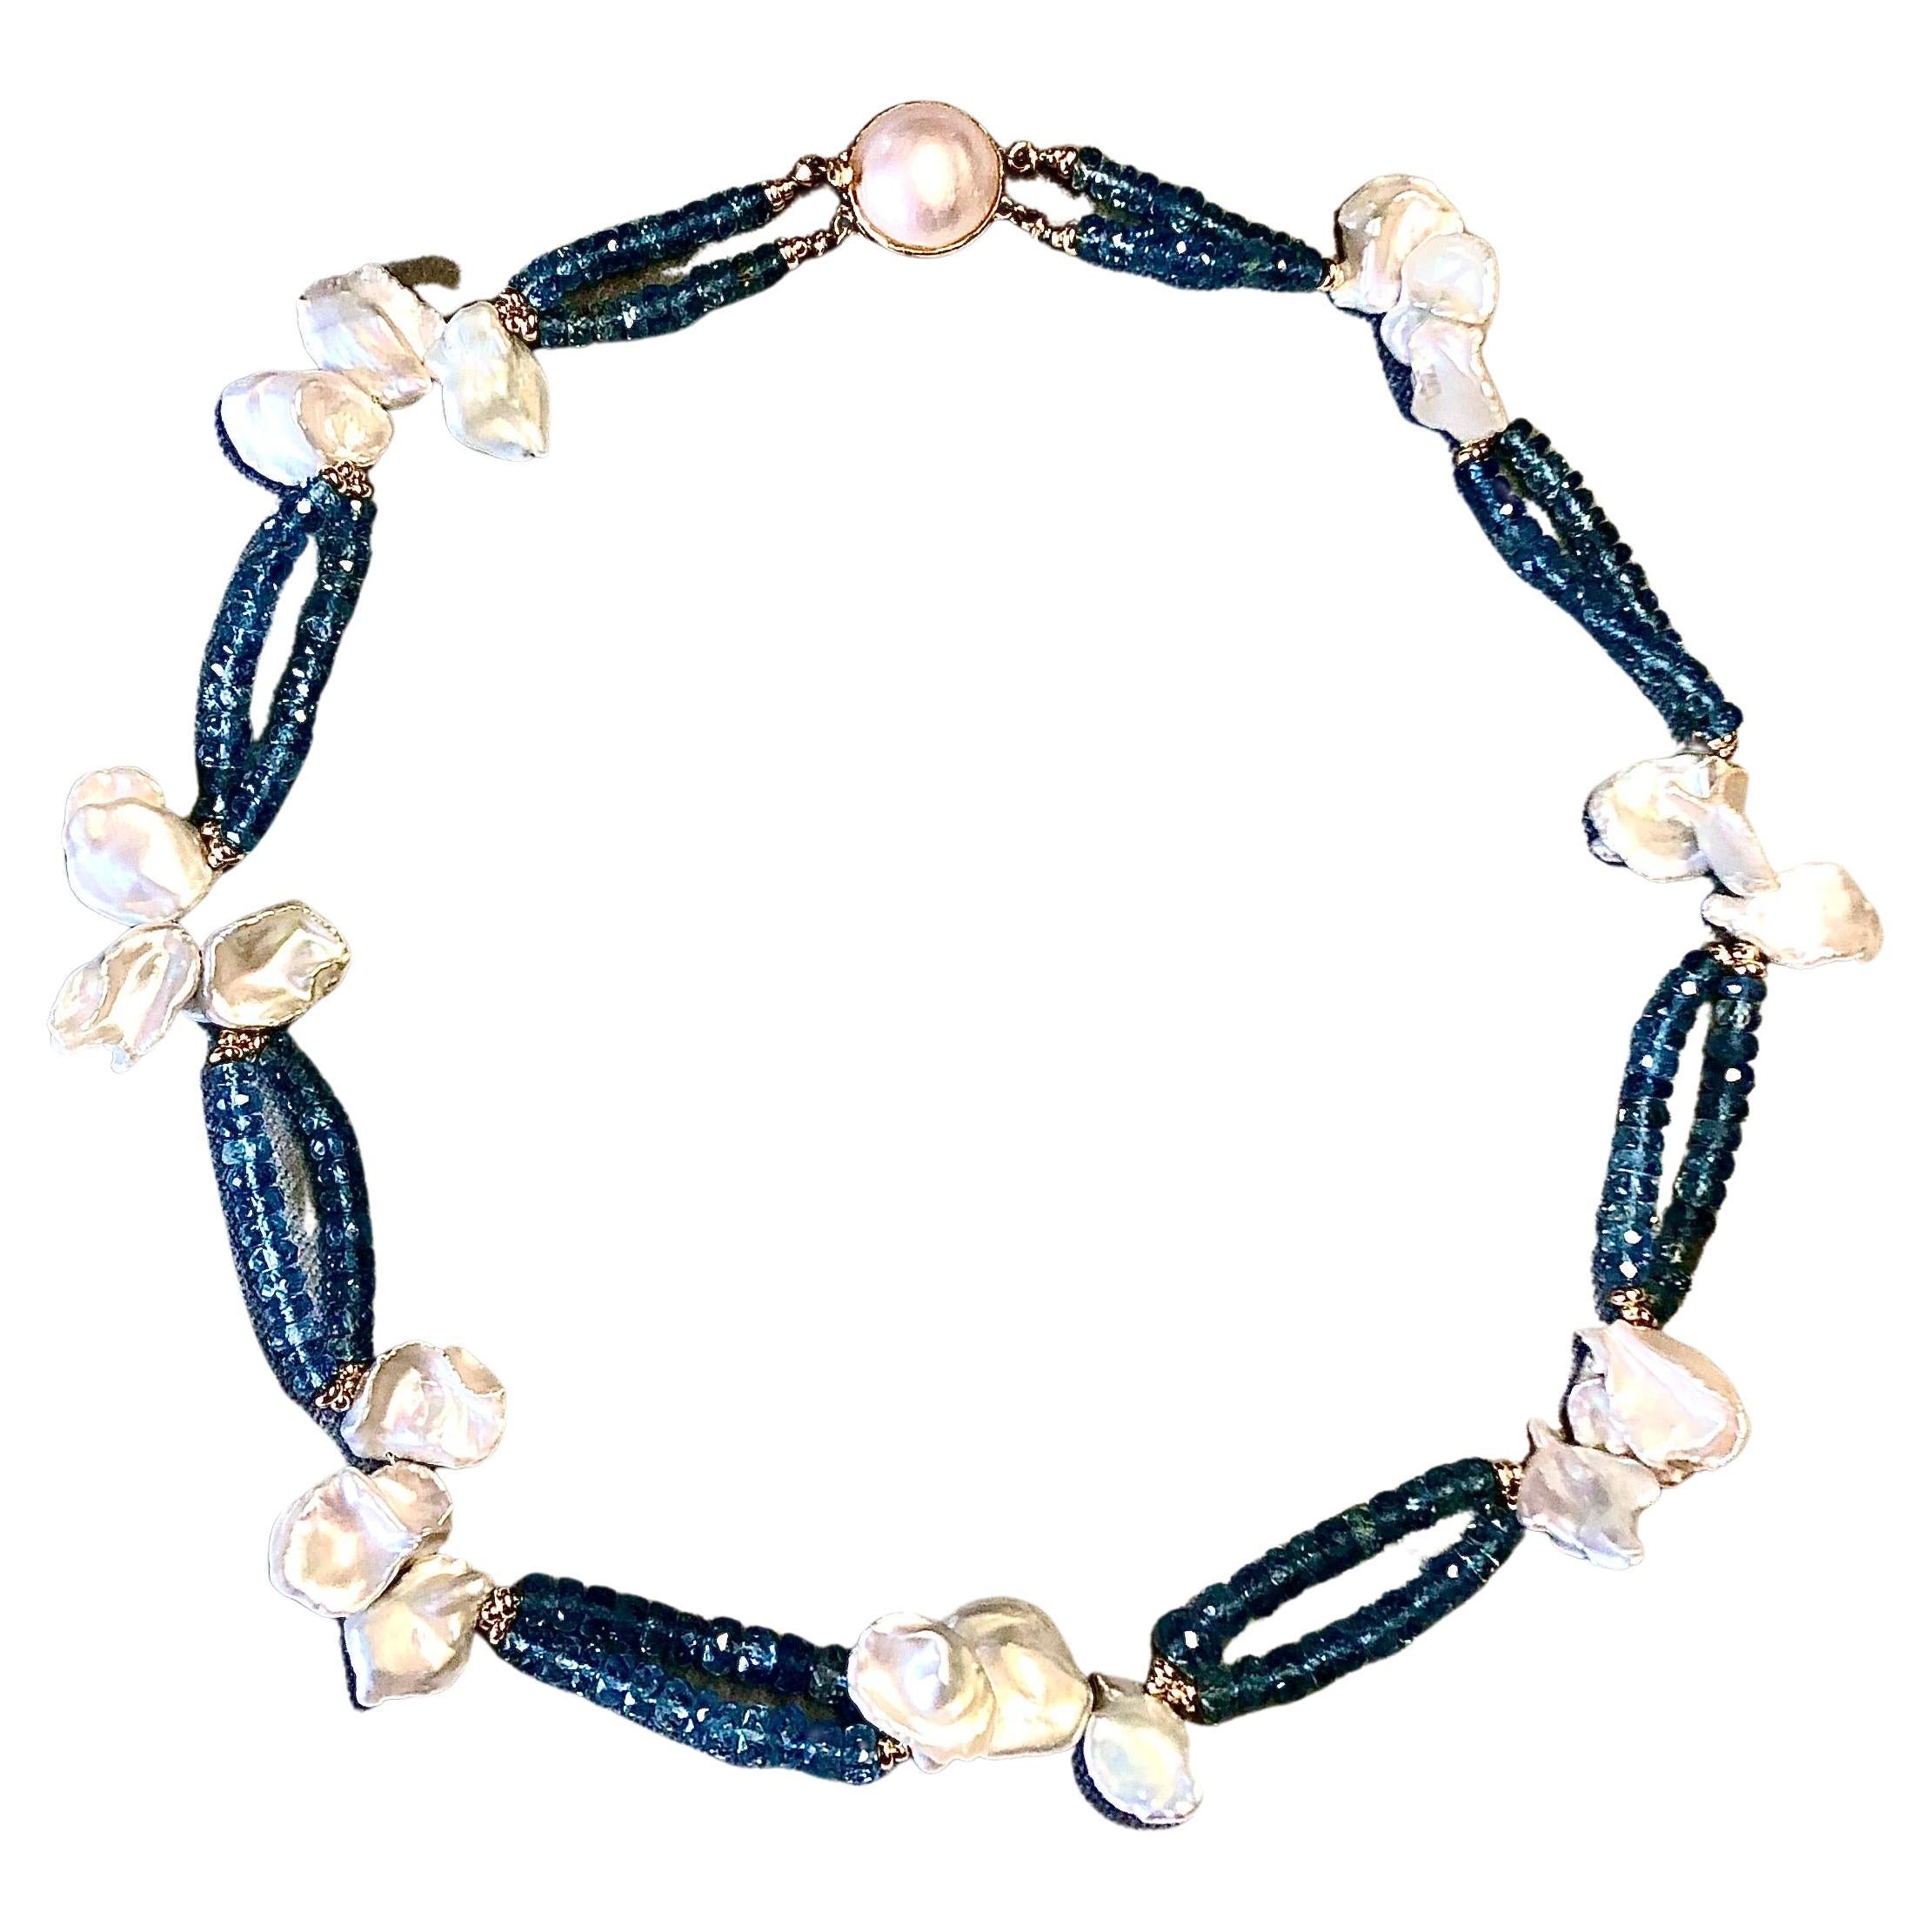 Blue aquamarine rondelles and Keishi pearls necklace, 14K yellow gold rondelles For Sale